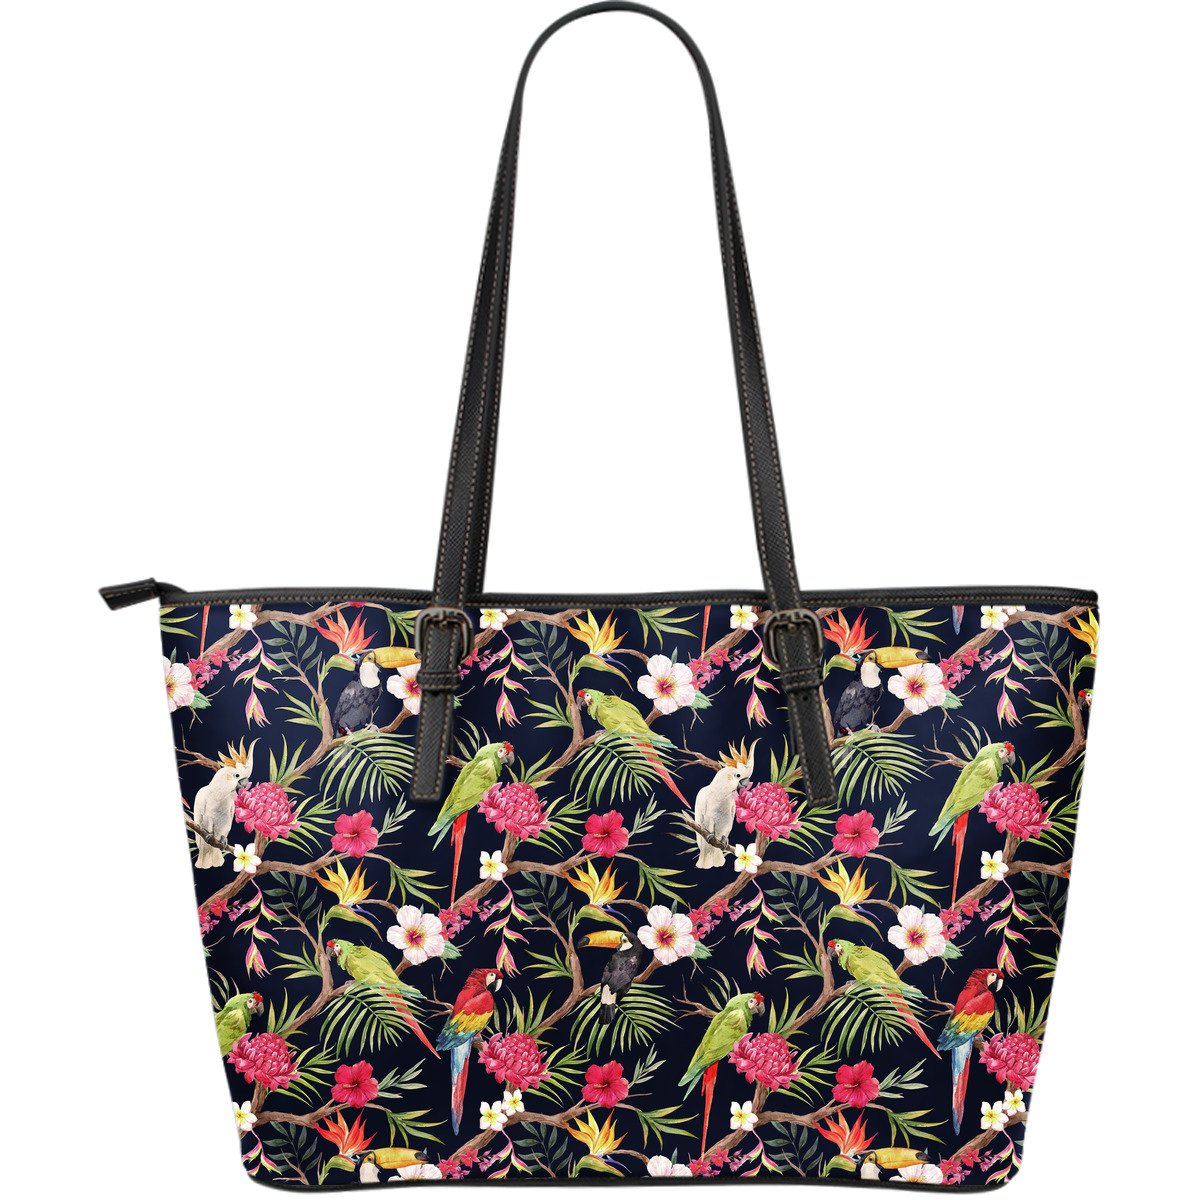 Parrot Toucan Tropical Pattern Print Leather Tote Bag